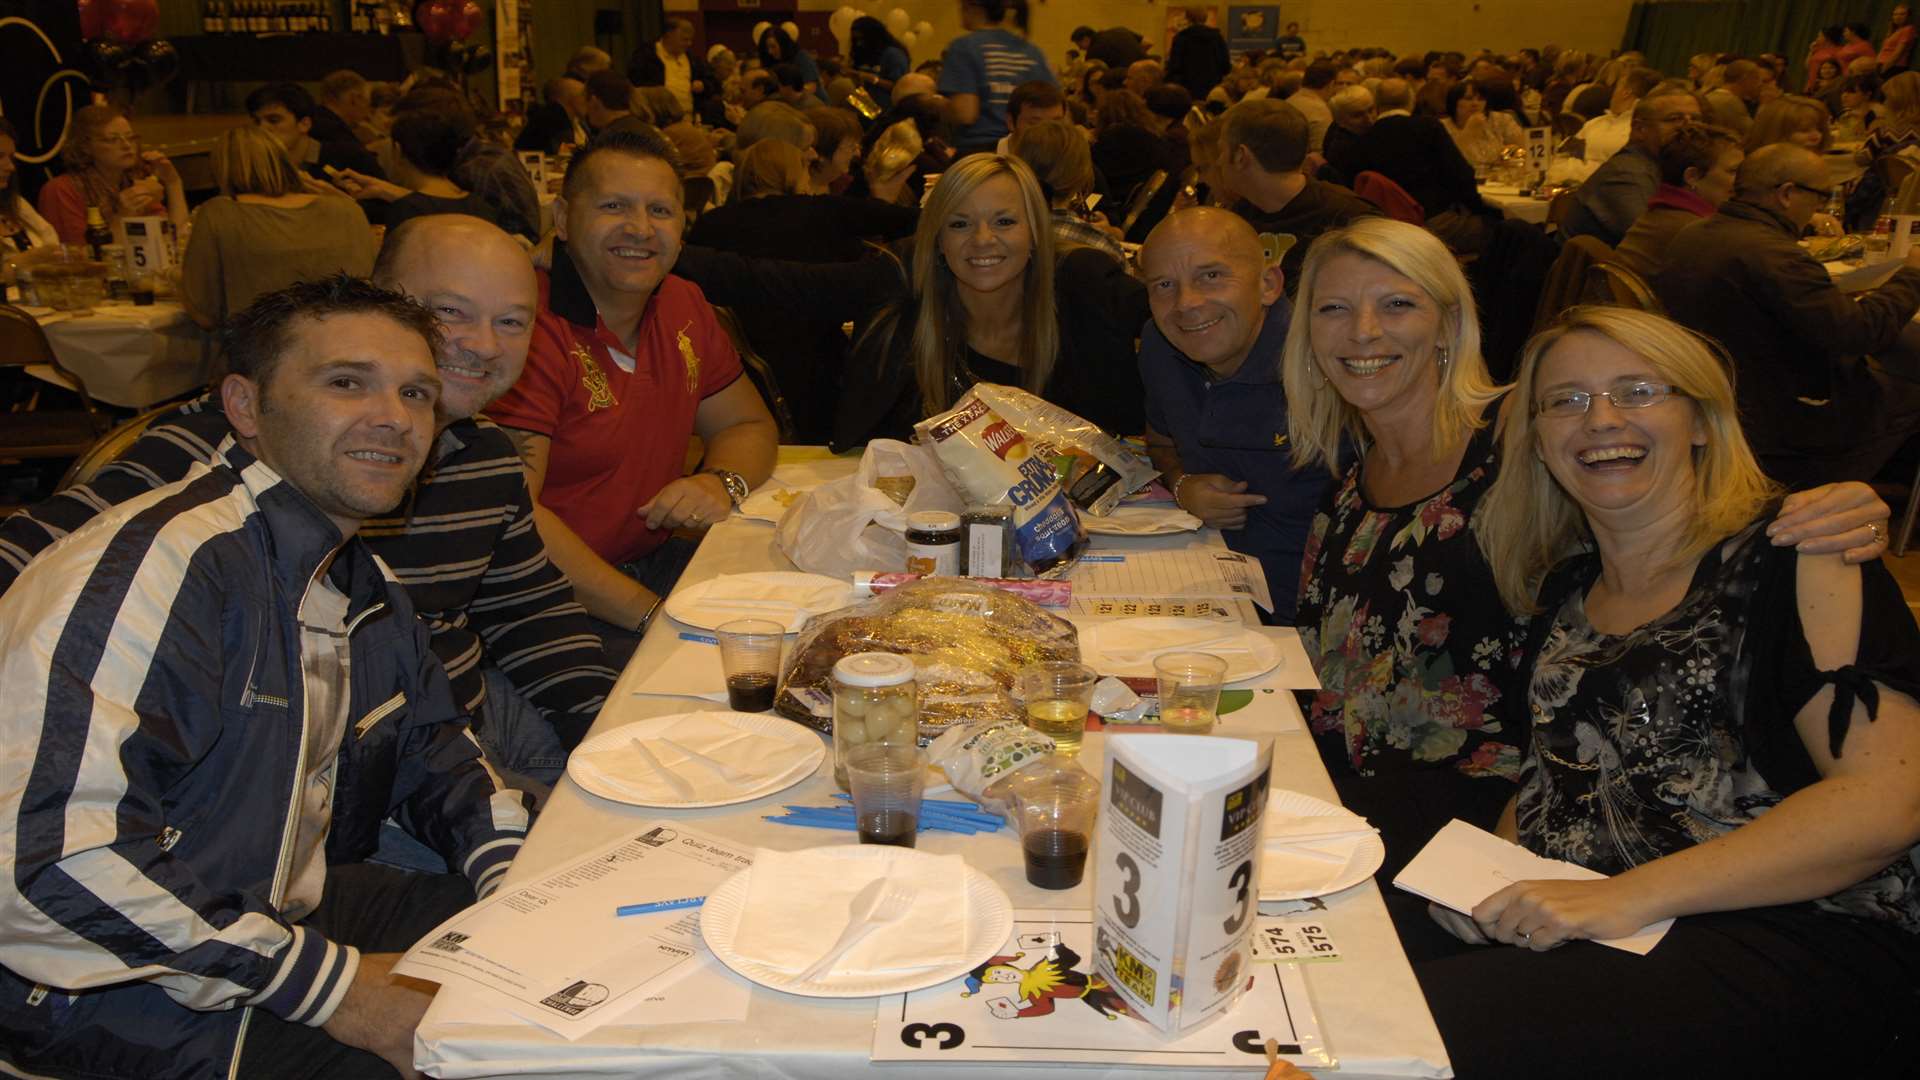 Teams have fun while supporting good causes at KM Big Charity Quiz events. The 10th anniversary Ashford heat on Friday October 16, 2015 is open for booking at www.kmbigquiz.co.uk.